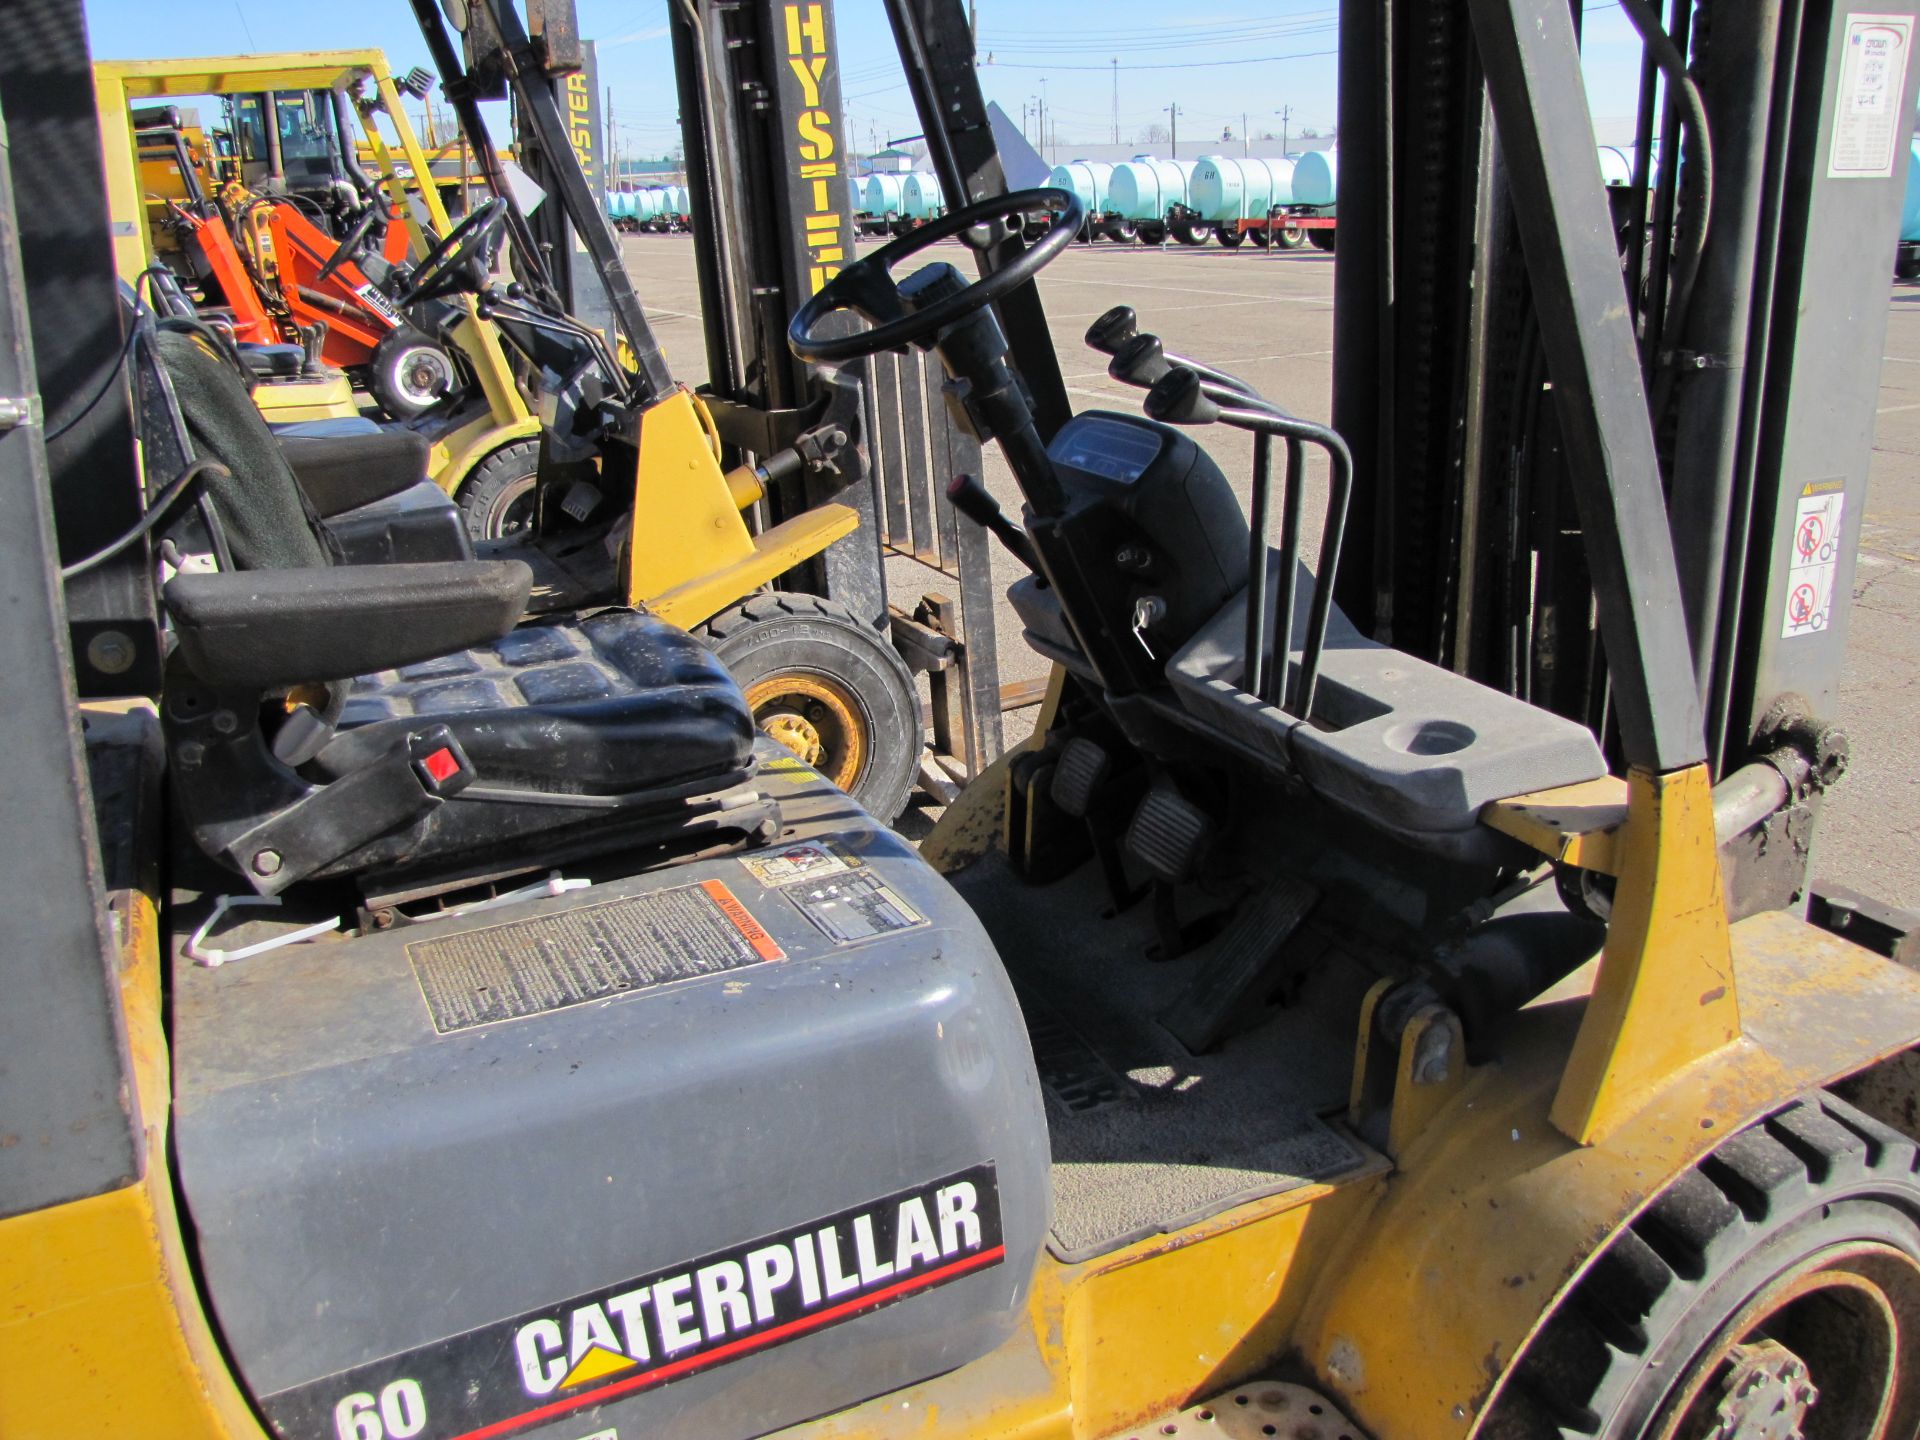 Caterpillar 60 forklift, 4500 lb capacity, propane, 3-stage, side shift, 28x9/15 fronts - Image 11 of 17